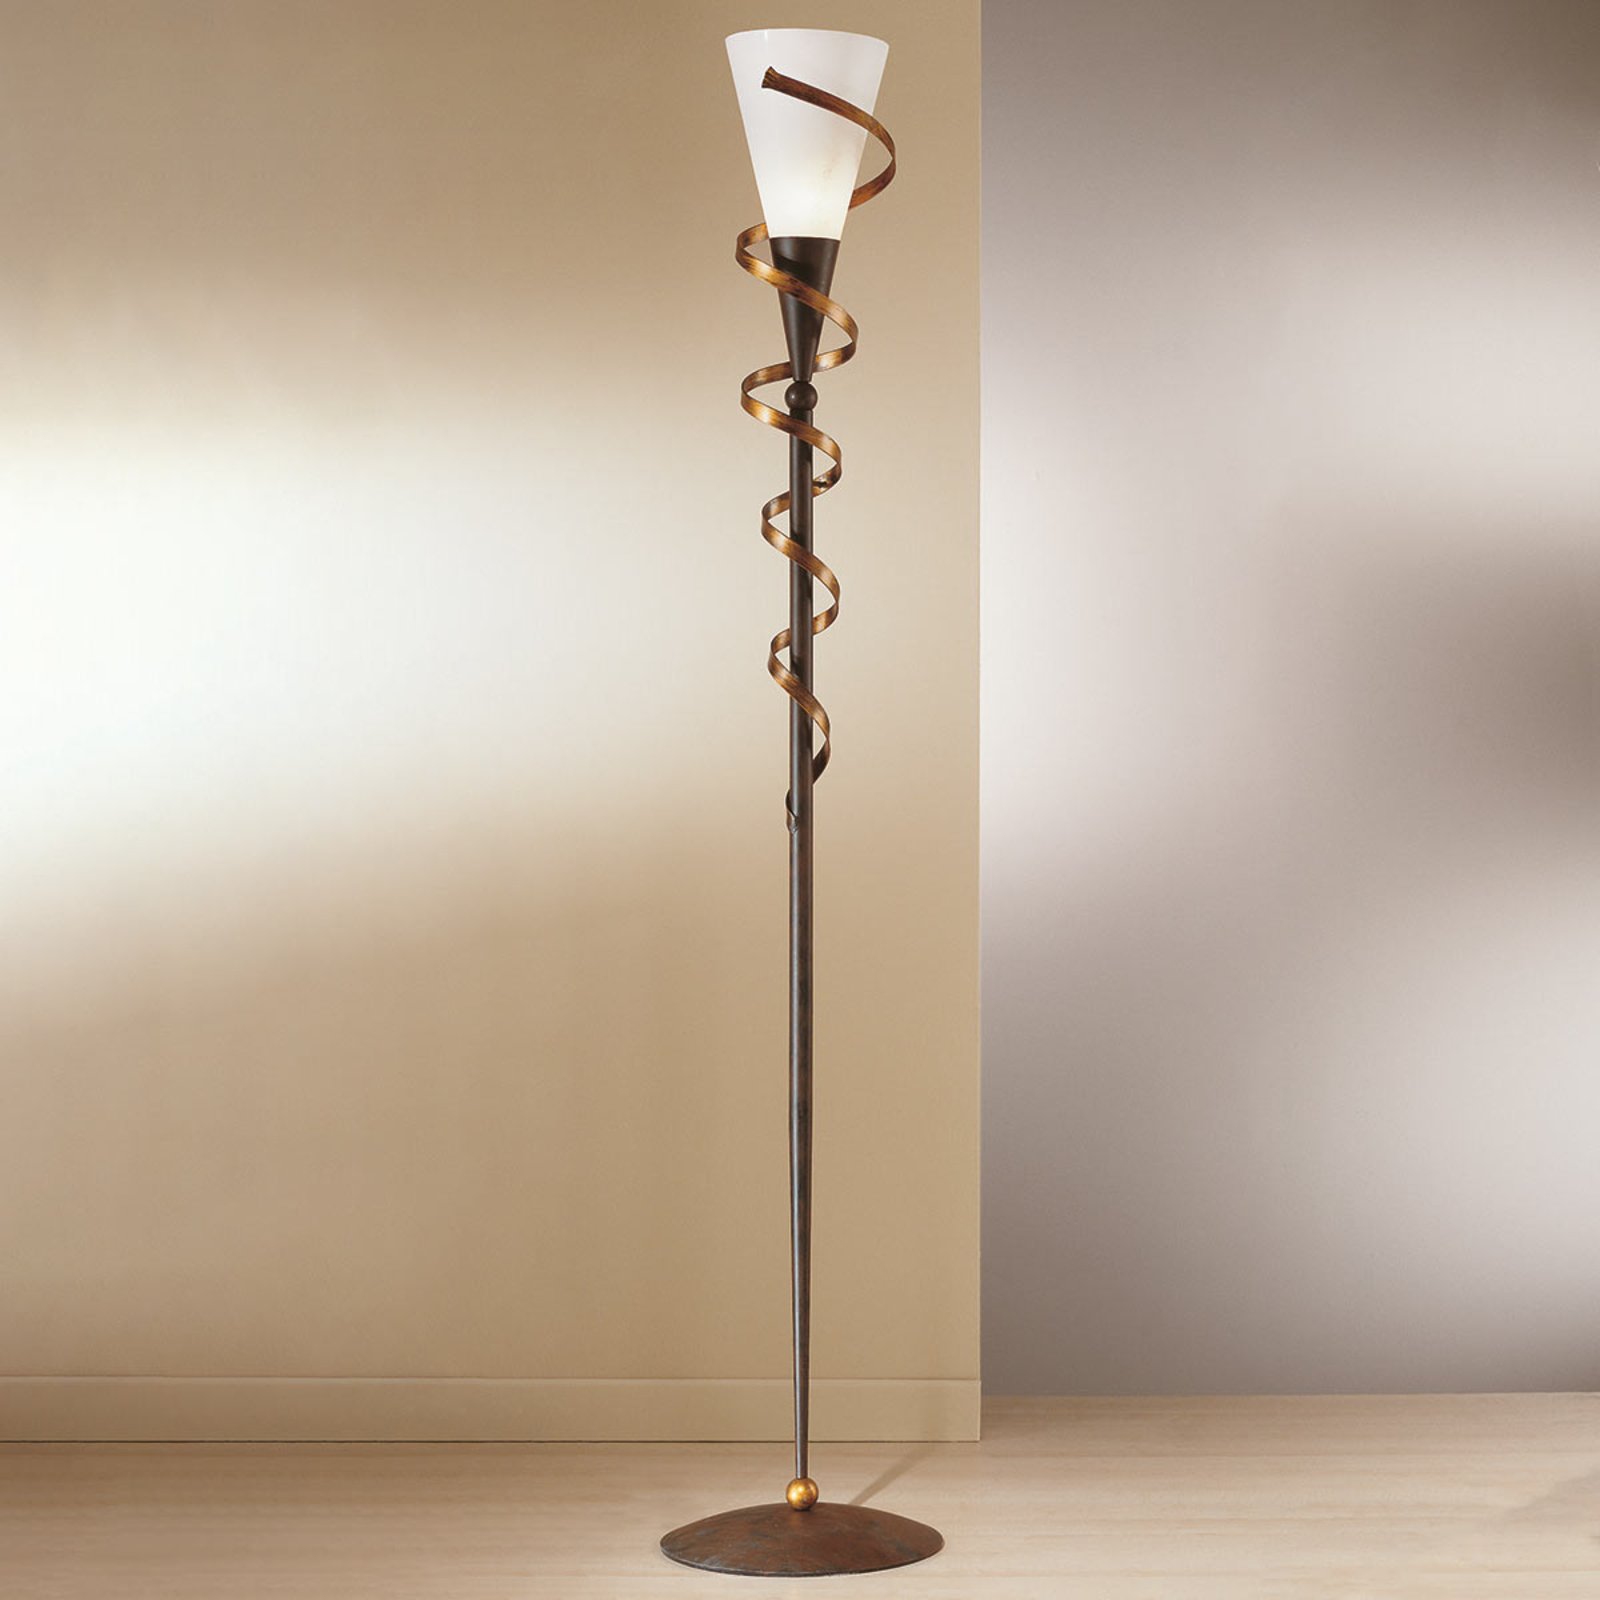 BONITO floor lamp with a golden spiral